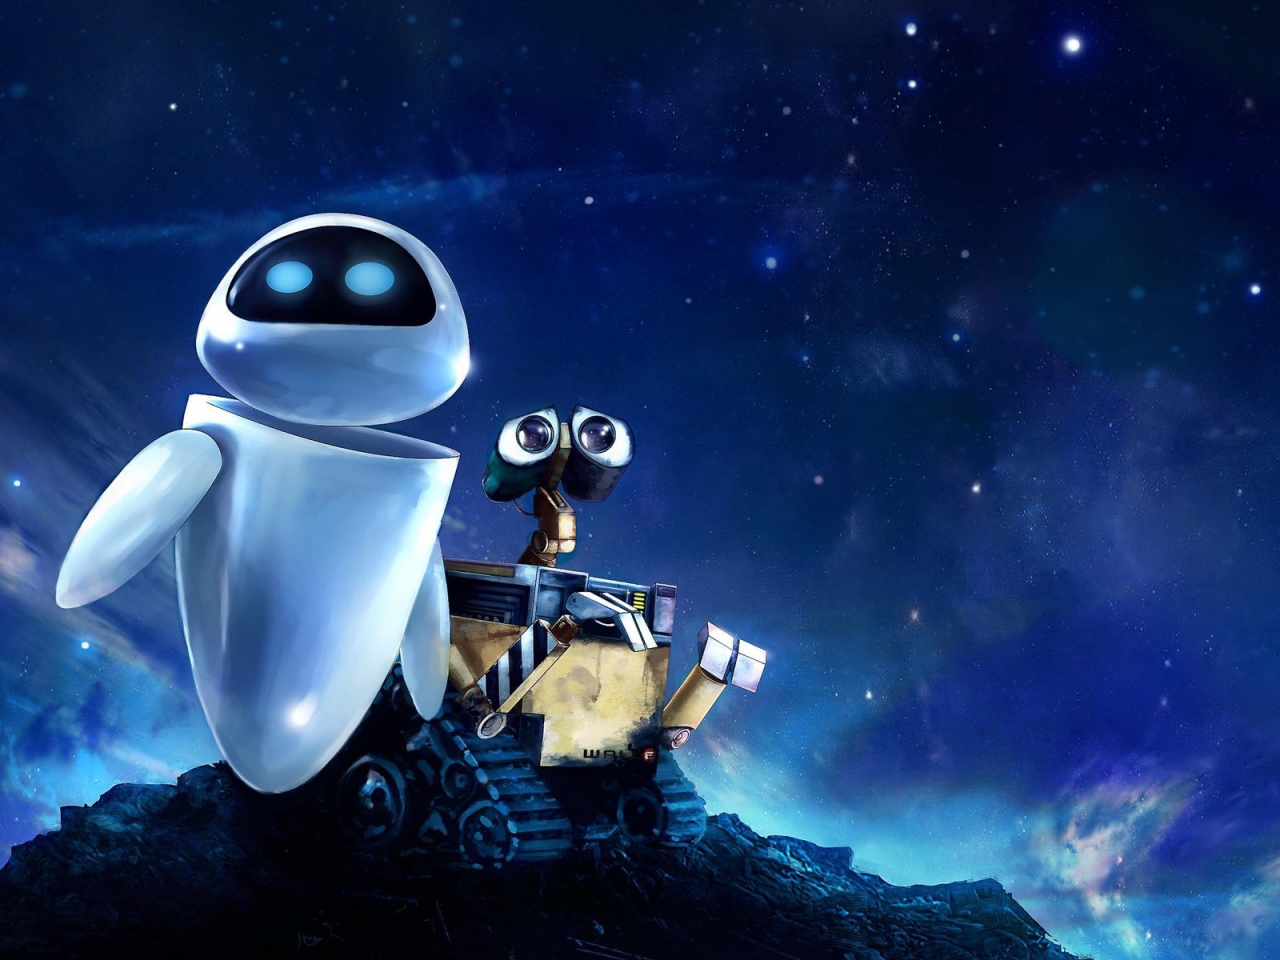 Walle Movie for 1280 x 960 resolution